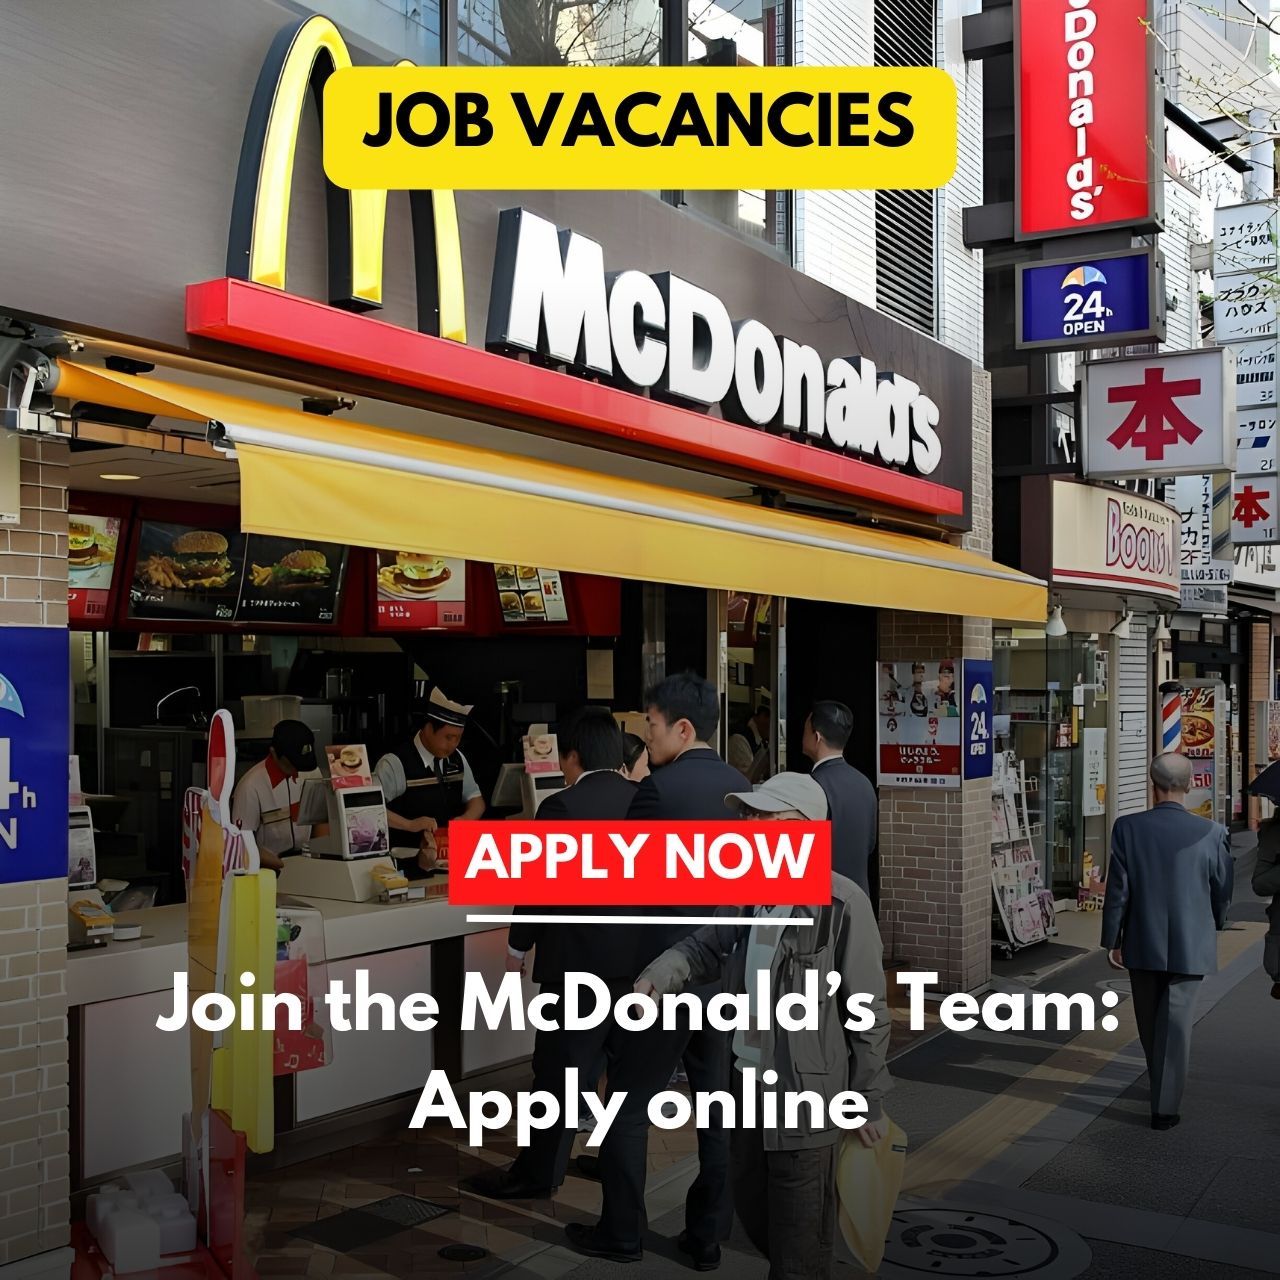 McDonald's Hiring: Learn How to Apply for a Job